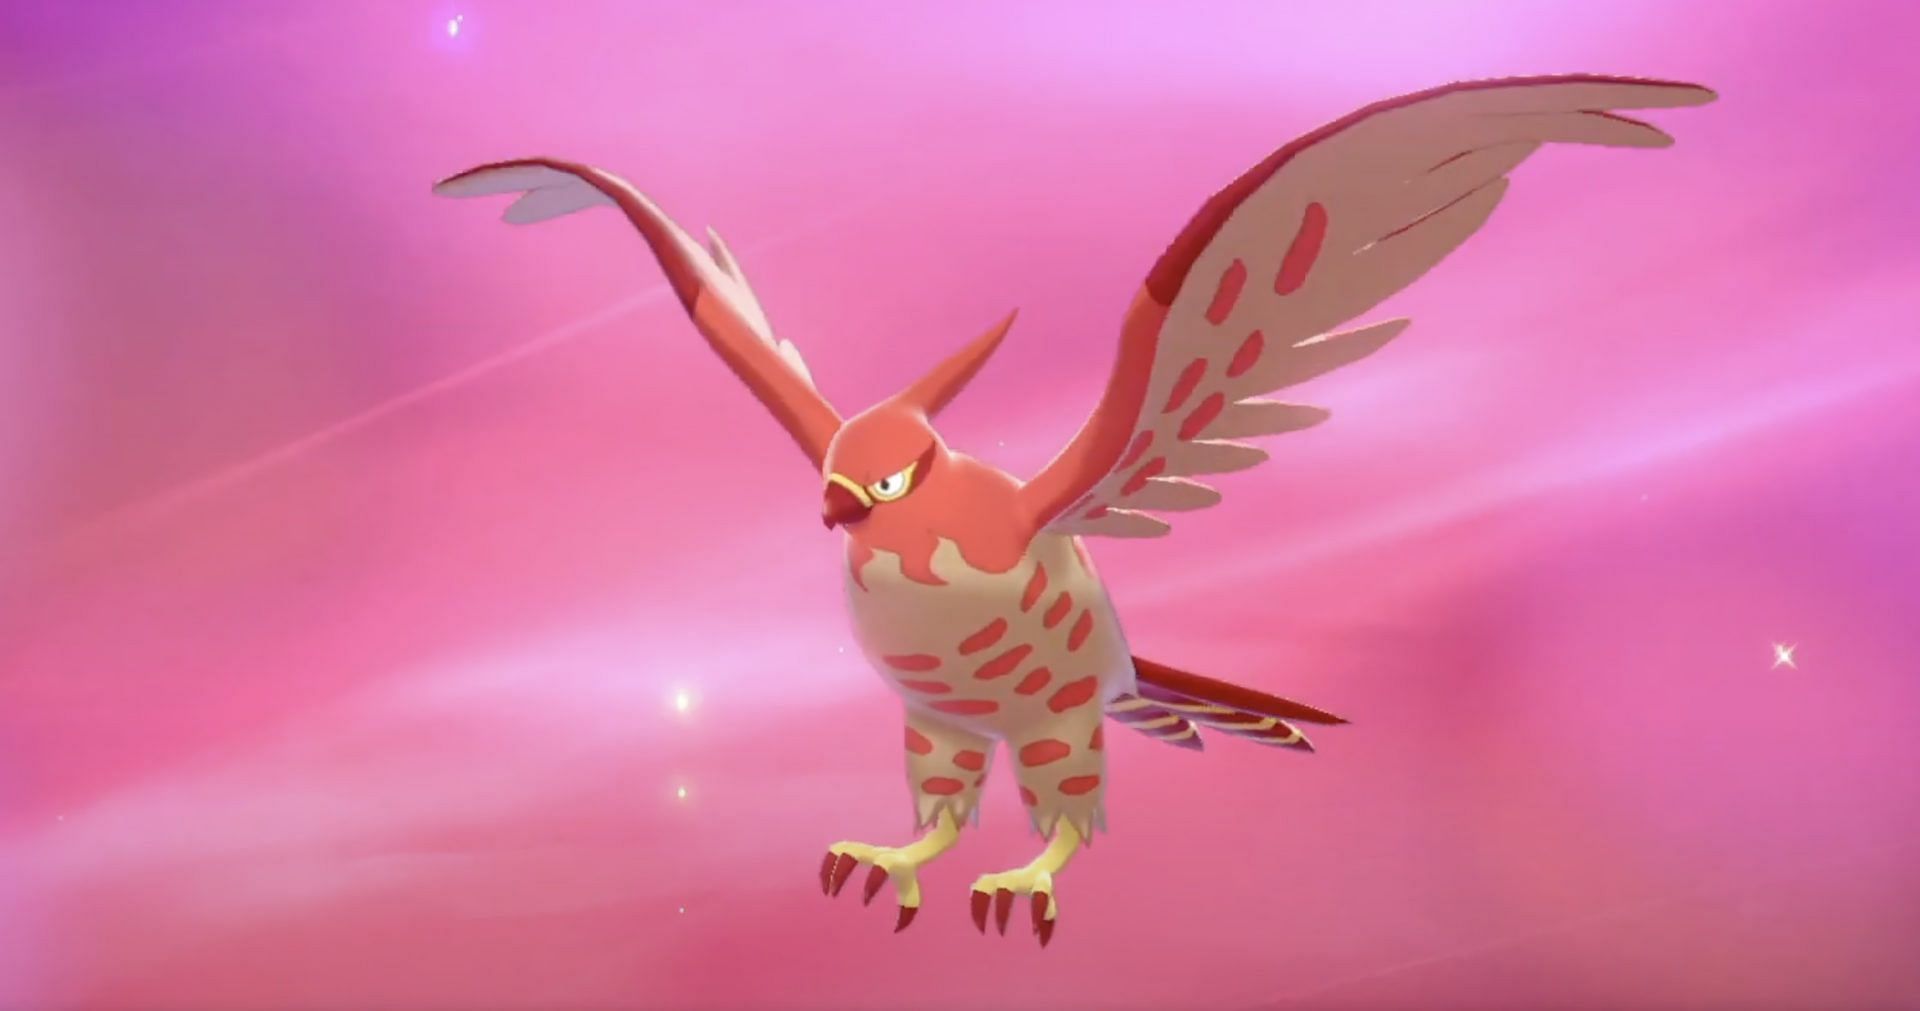 Talonflame can use strong attacks like Brave Bird (Image via Game Freak)